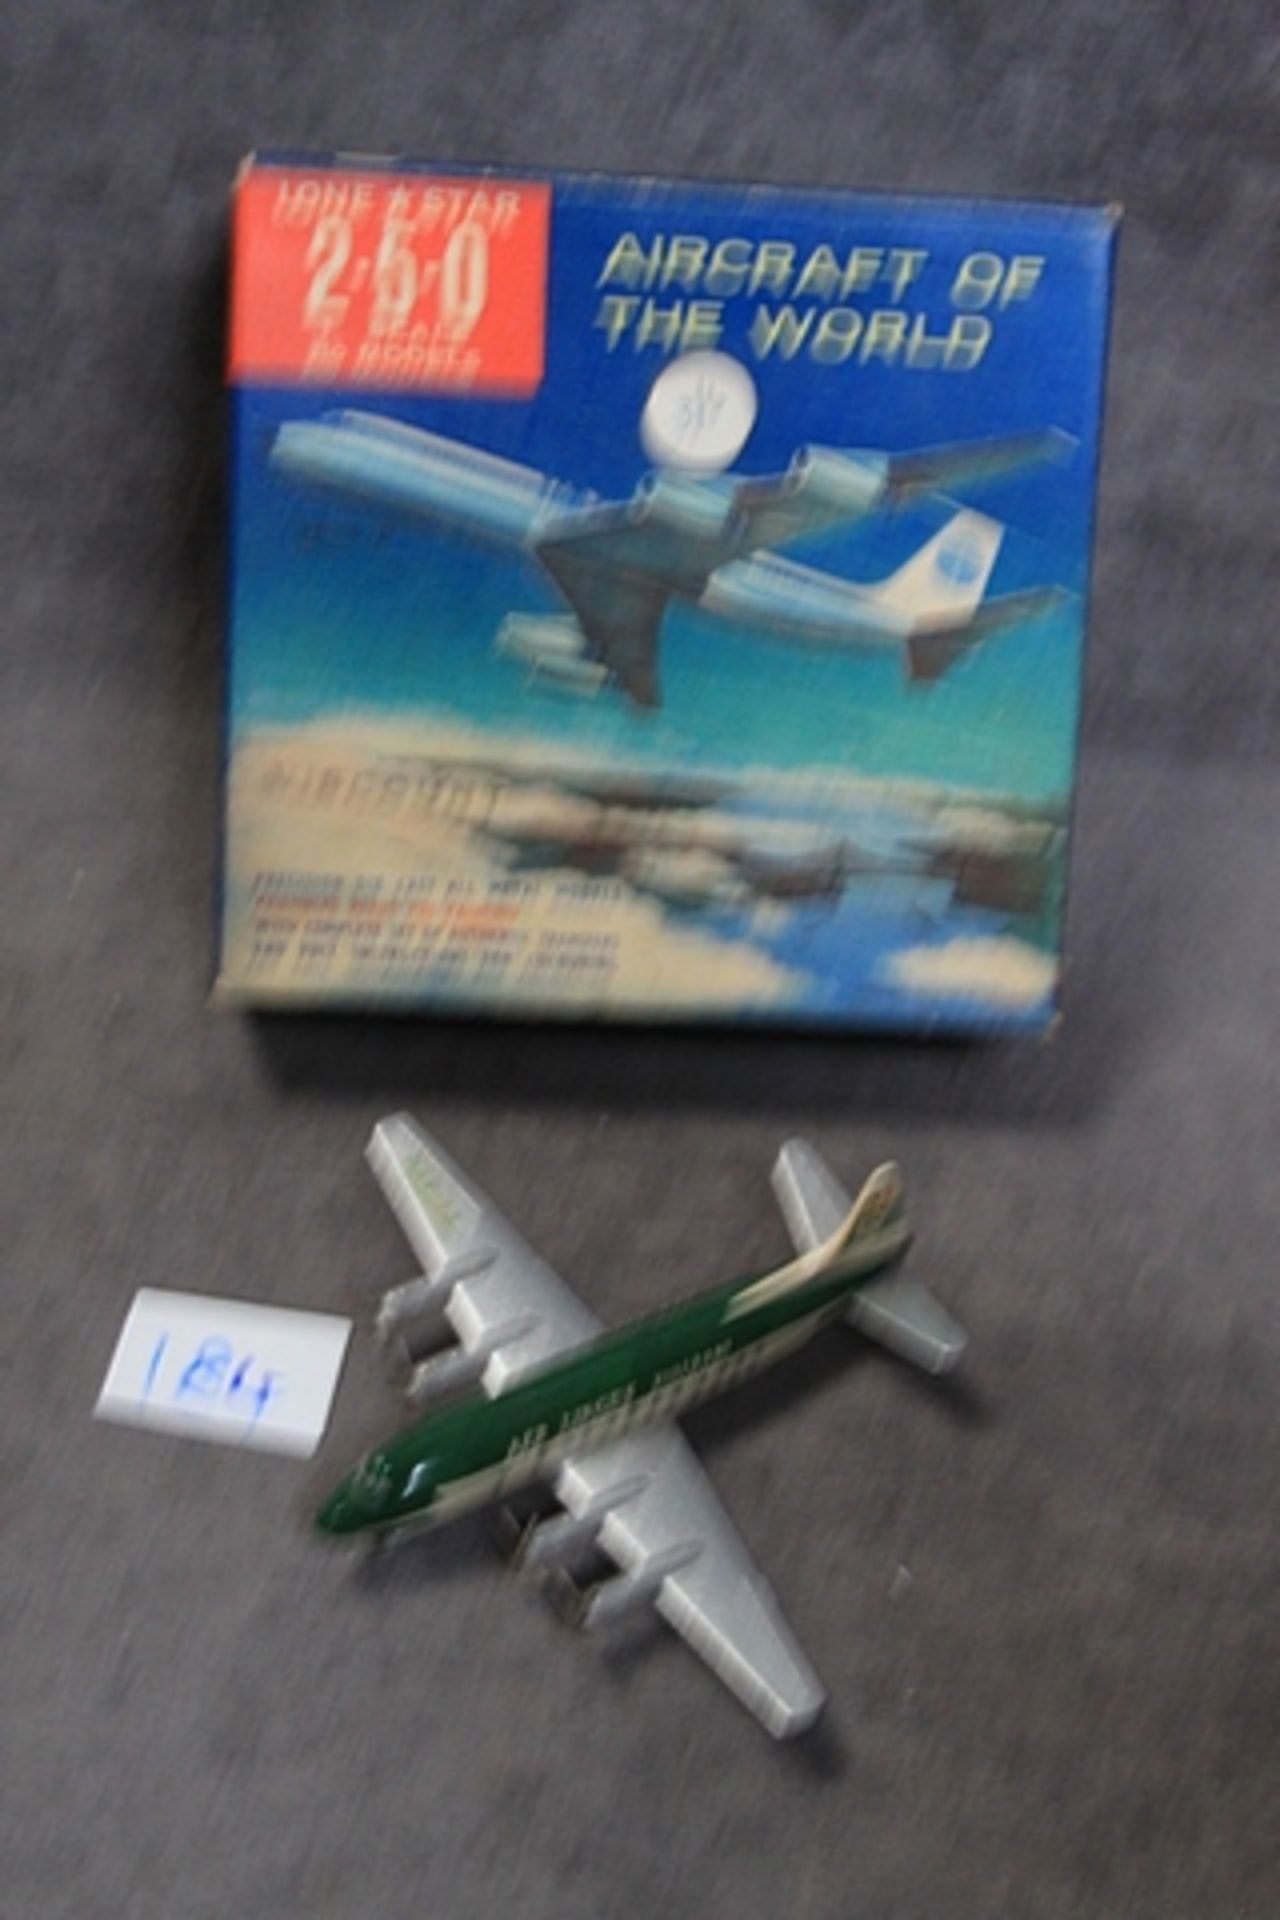 Lone Star Aircraft of the World 1/250th scale Diecast Aer Lingus Decal Plane - Image 3 of 3